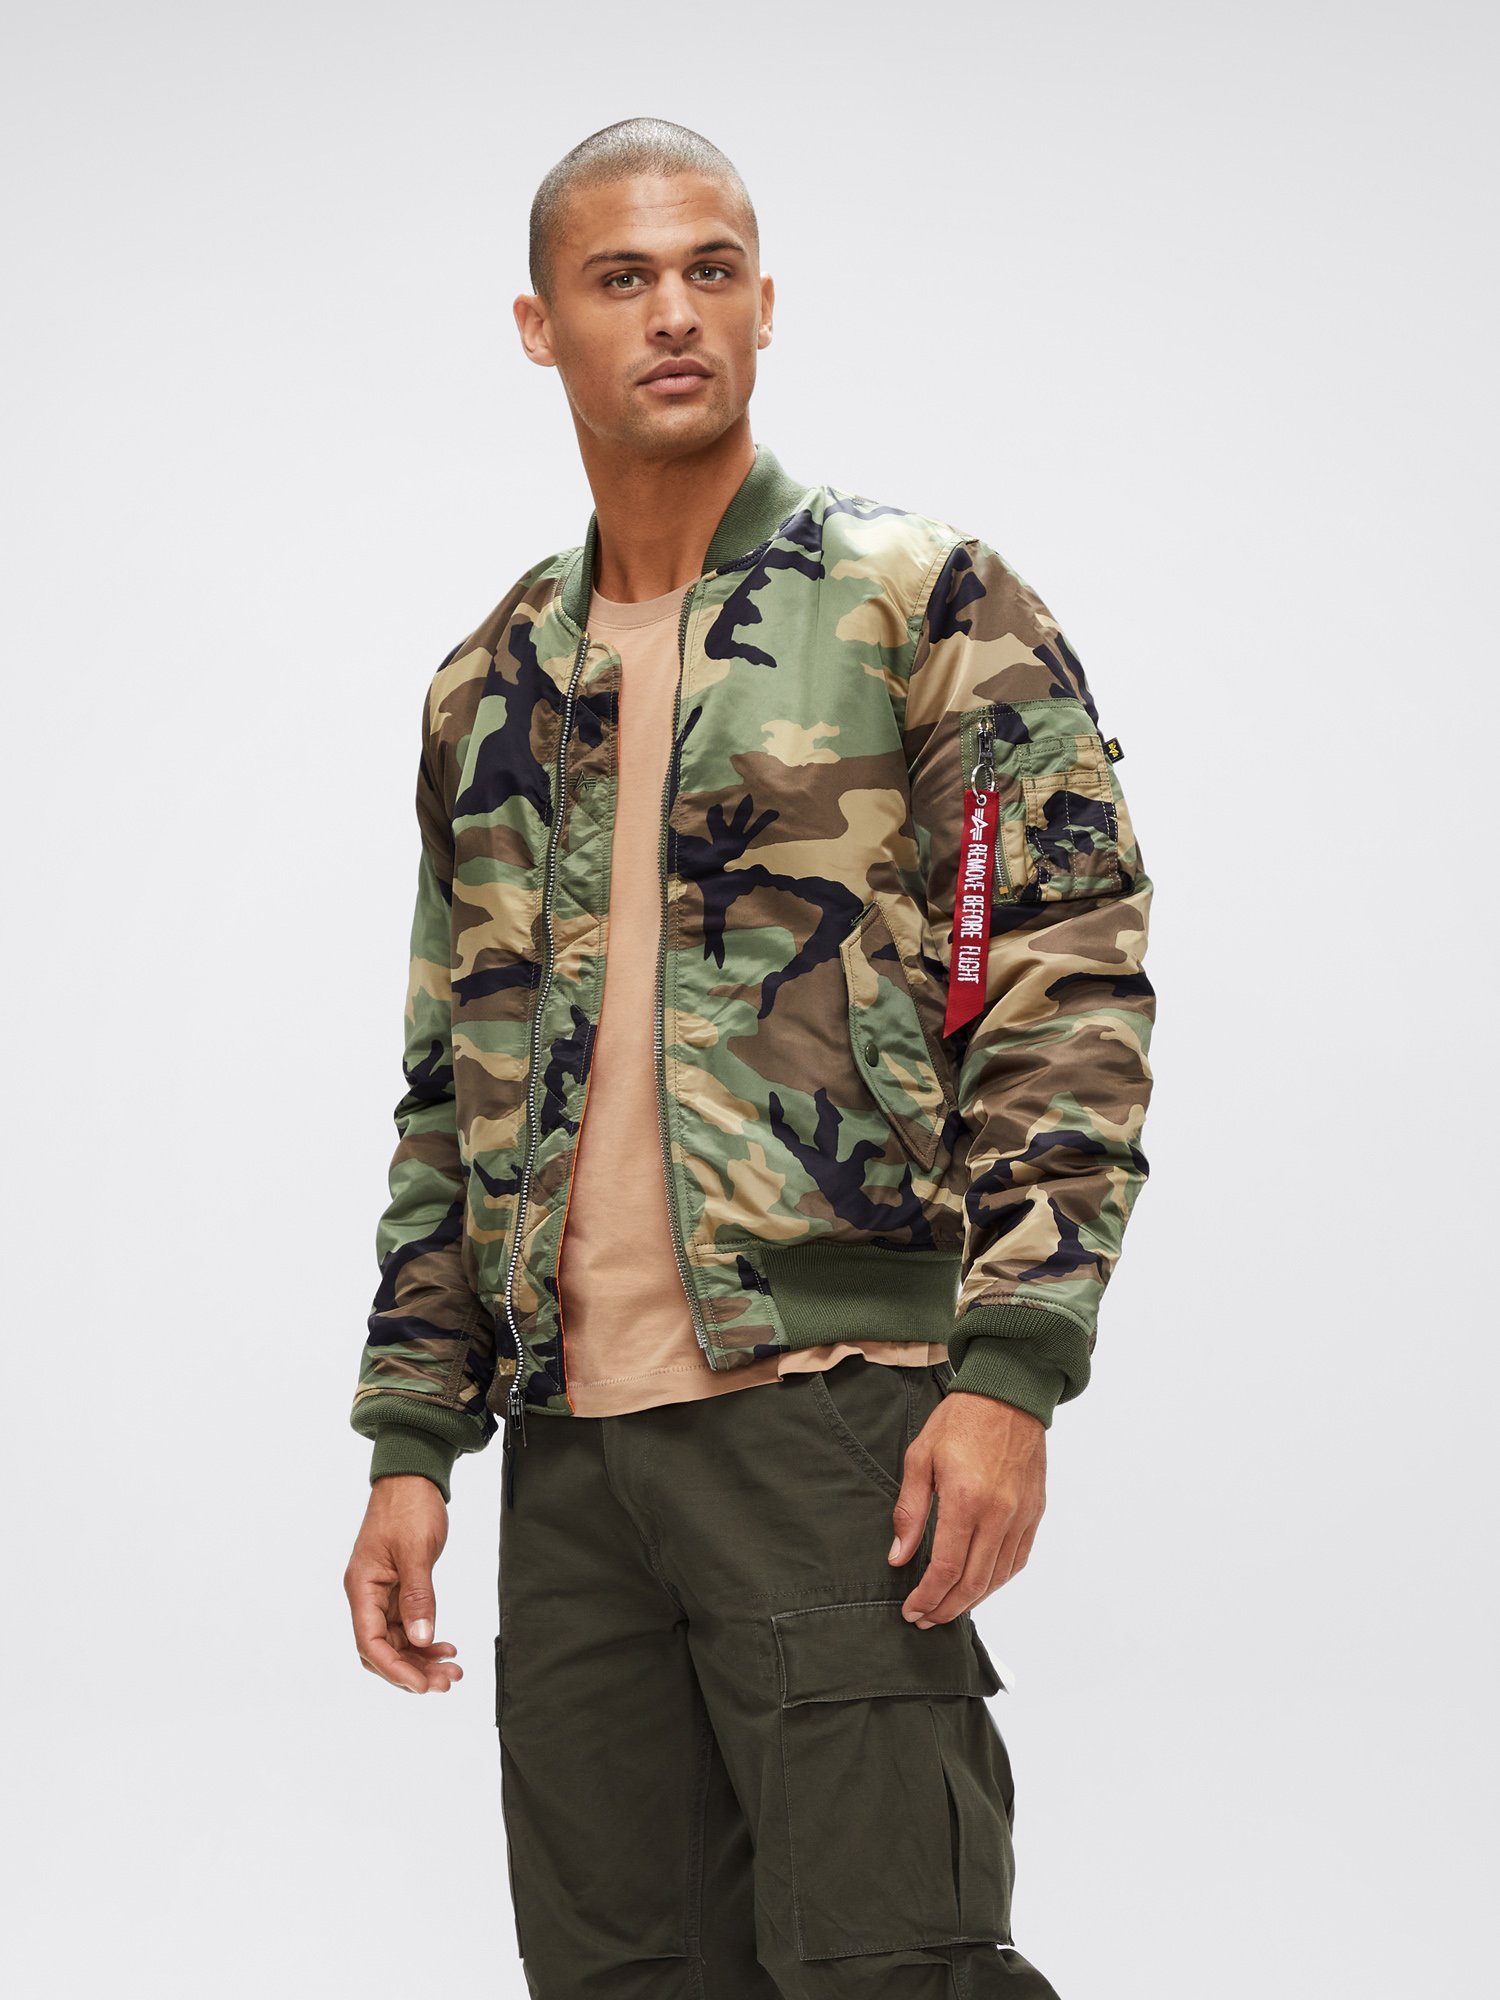 MA-1 BOMBER JACKET SLIM FIT OUTERWEAR Alpha Industries WOODLAND CAMO XS 